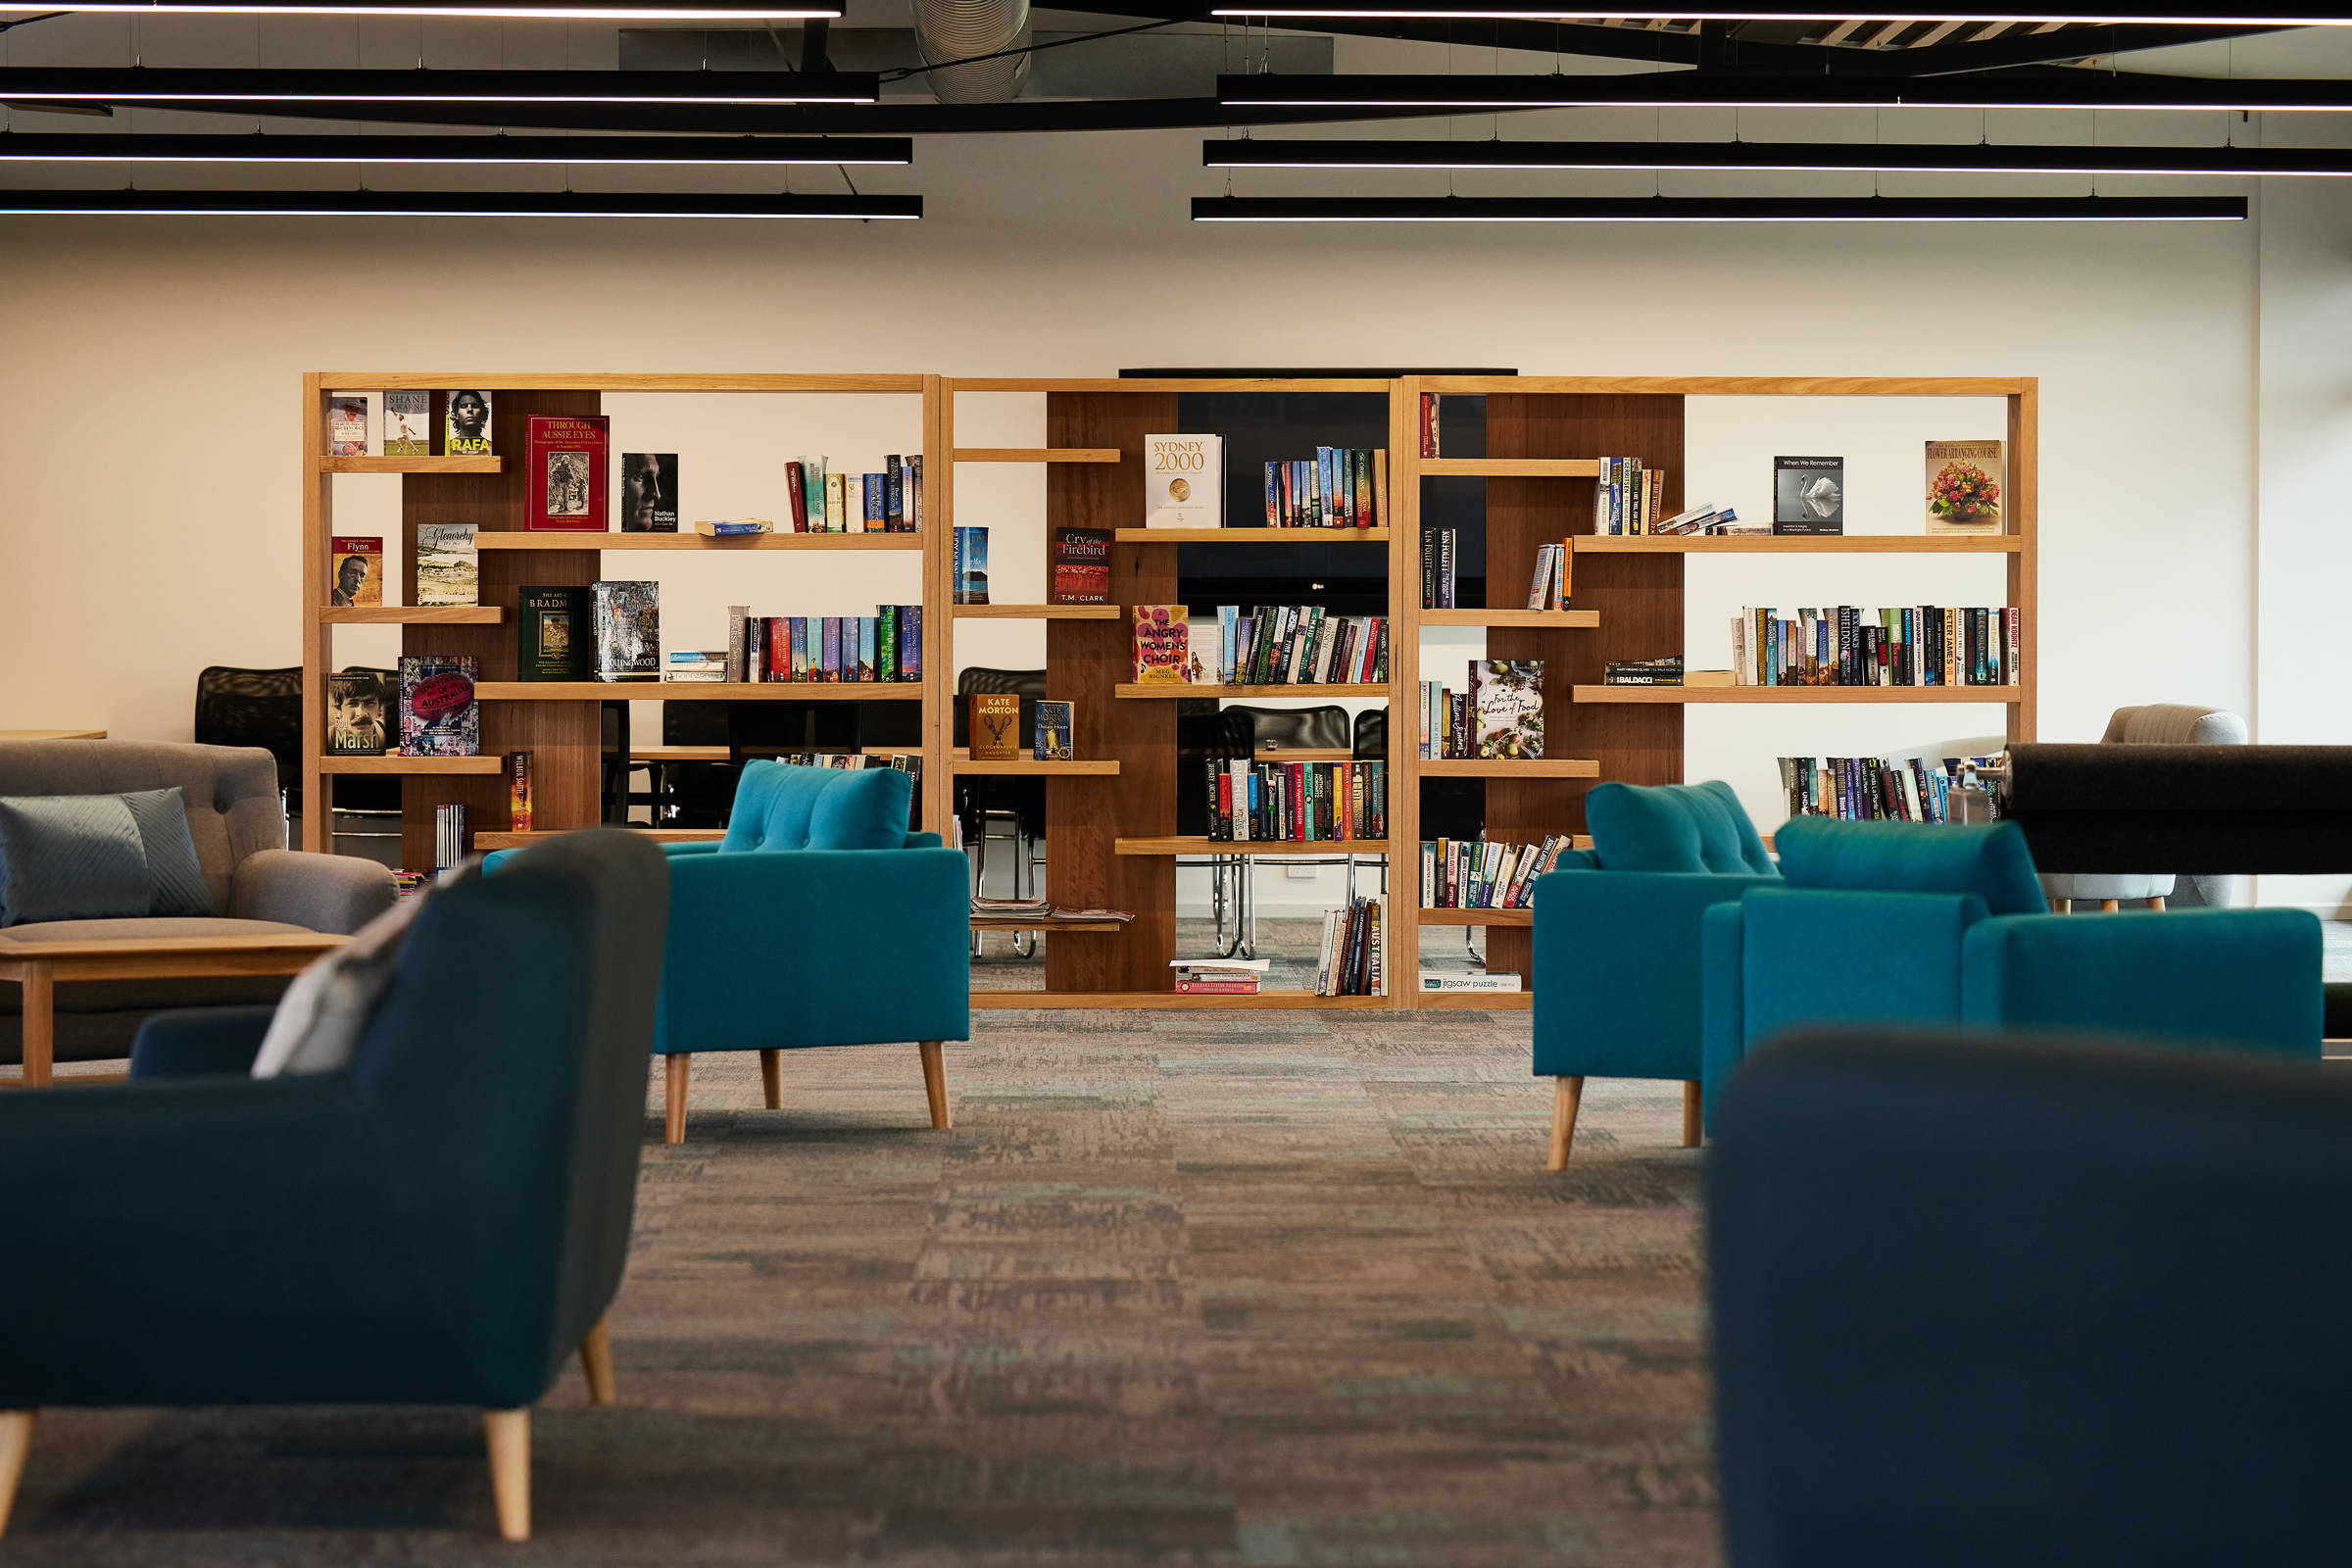 A large open space with teal and grey lounge chairs and a large wooden bookshelf at the rear of the room. The bookshelf is filled with books and the chairs are clustered around tables. Credit: Samuel Shelley.